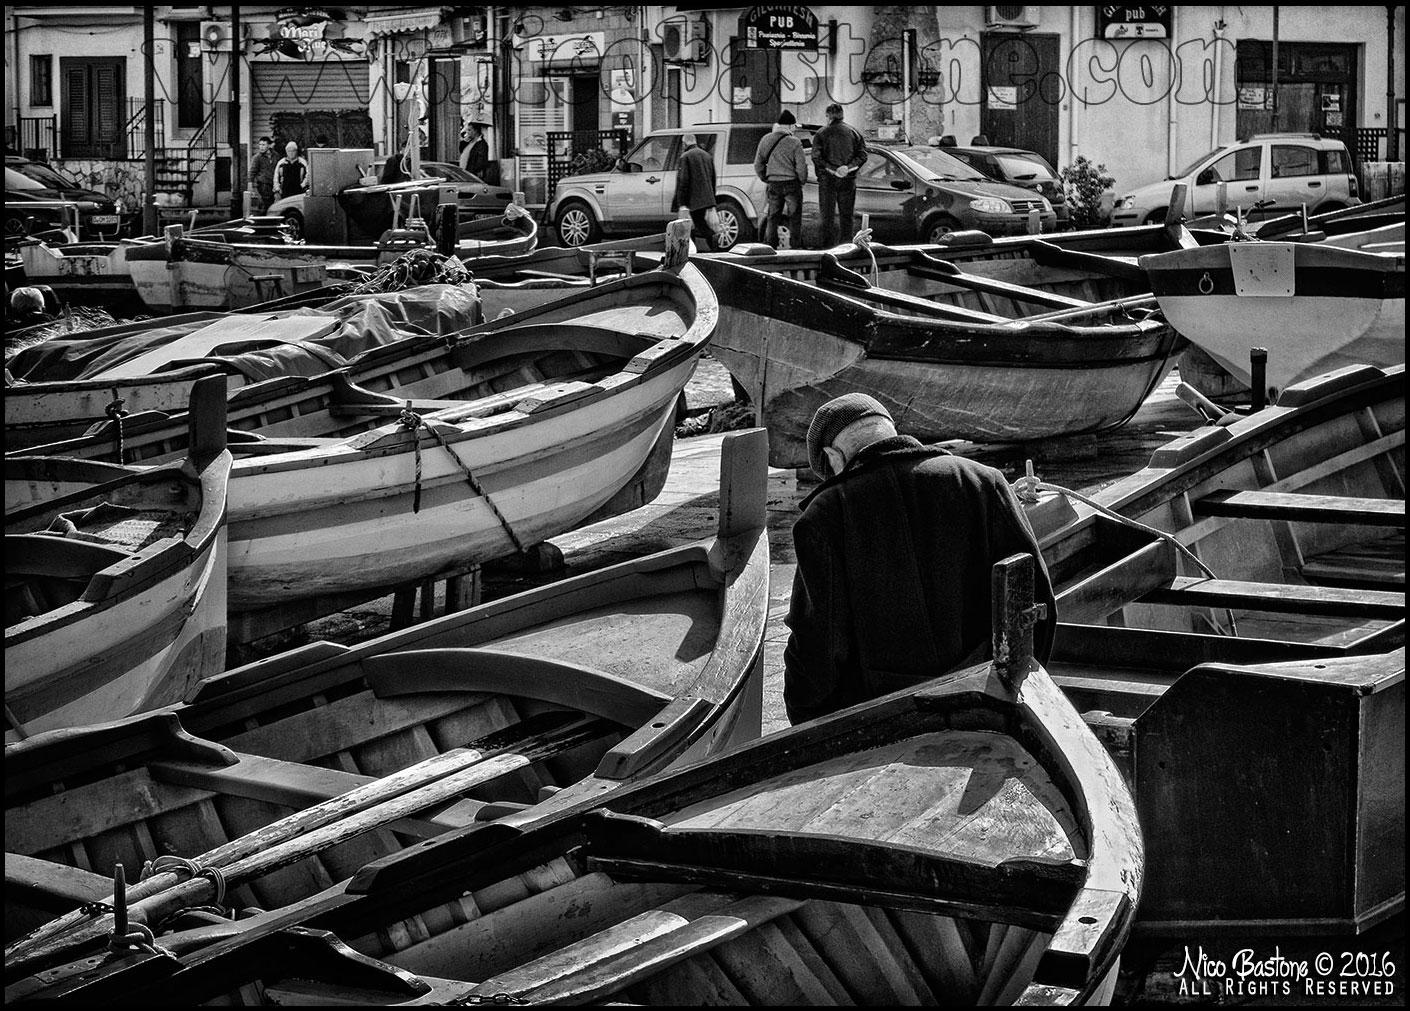 Aspra, Bagheria PA "Boats and People 01"